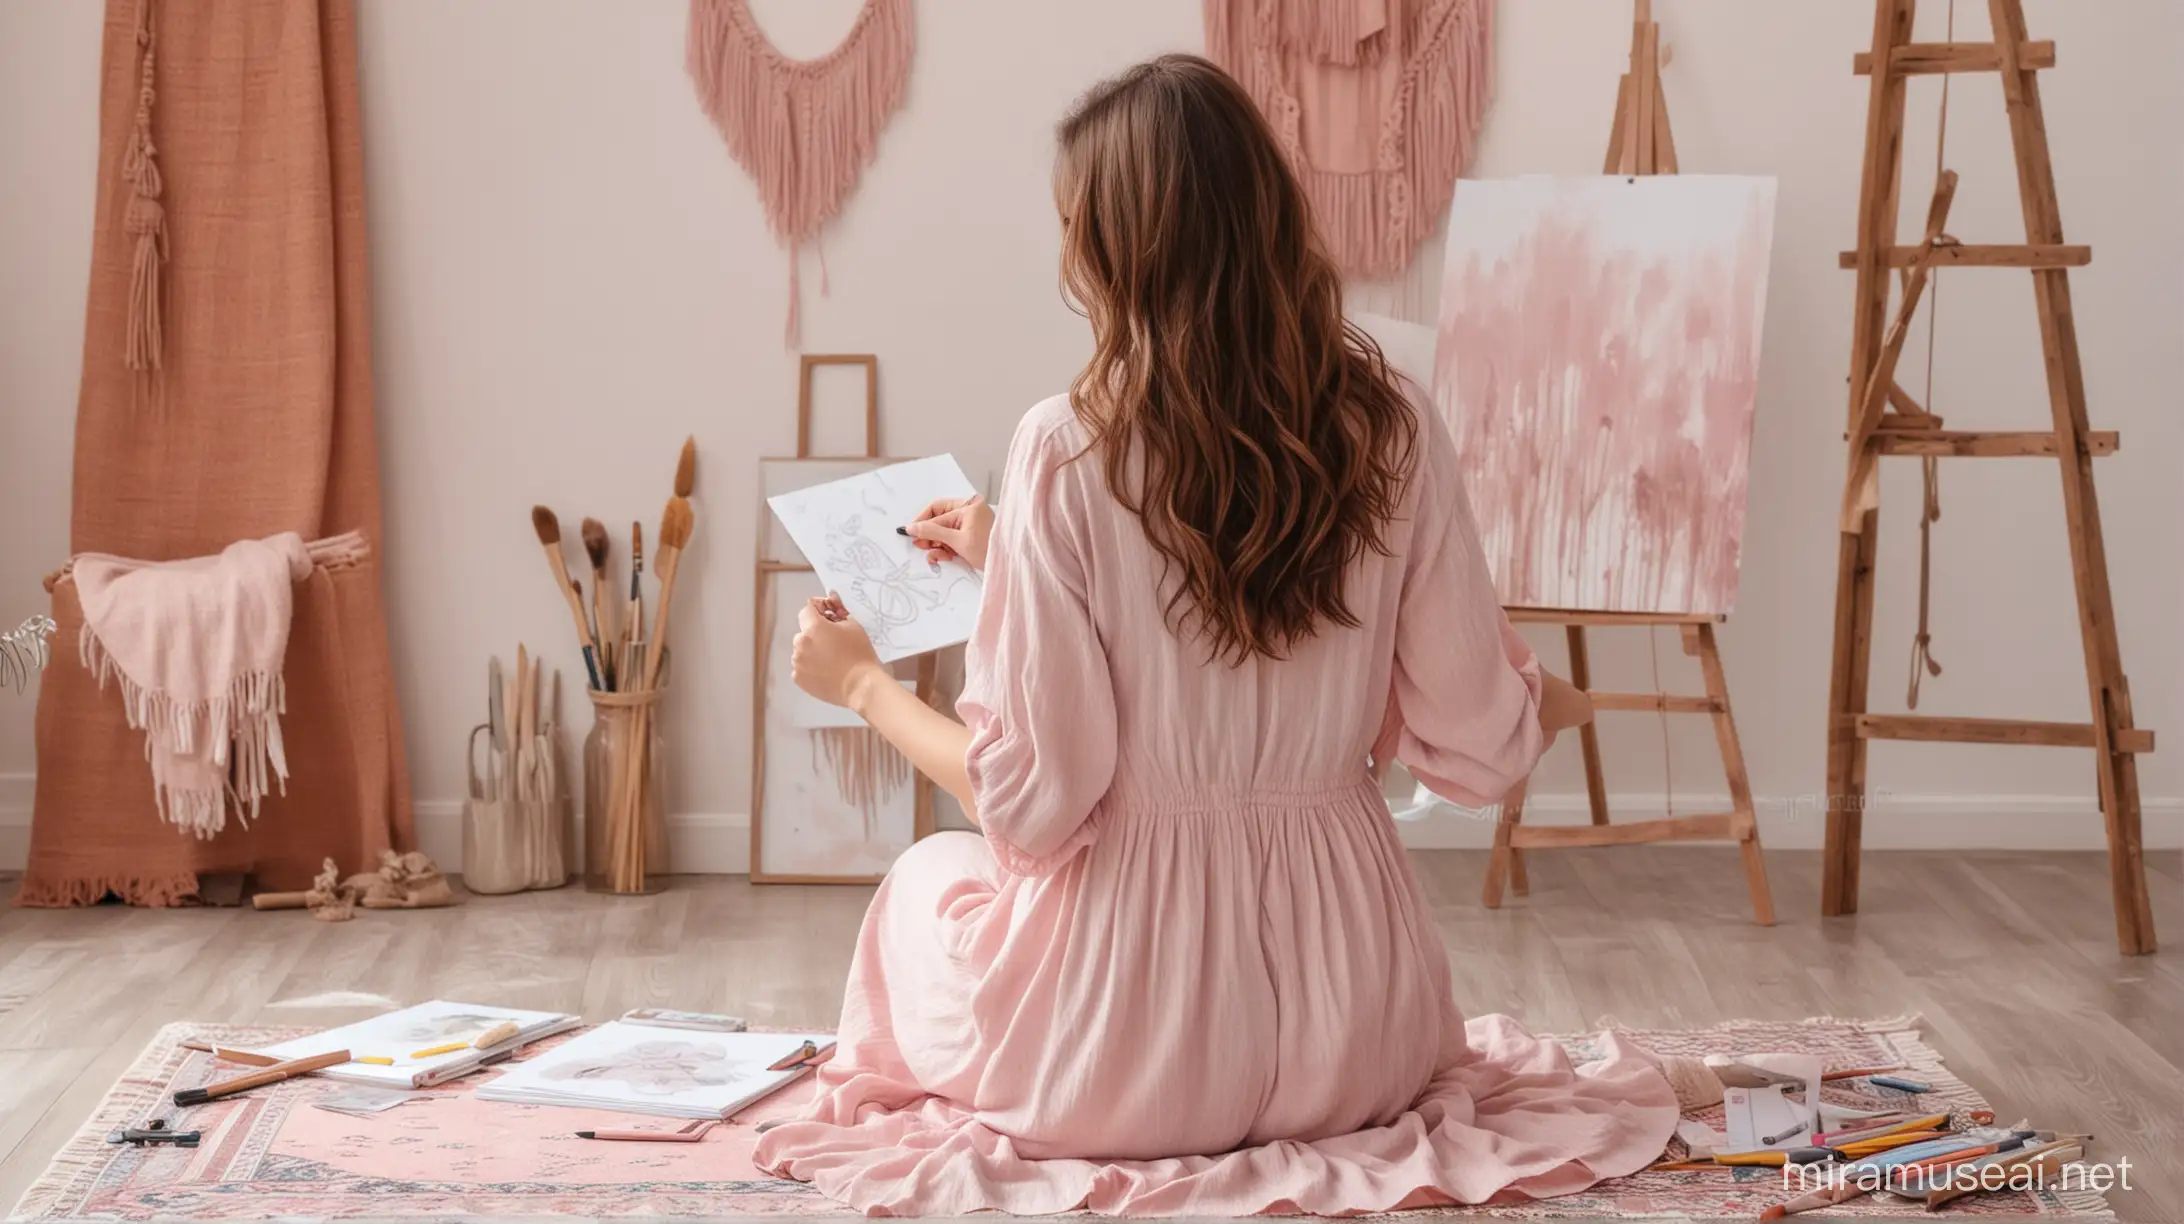 a real photo of a beautiful brown hair woman from behind. boho style. sitting on the floor. holding a pencel drawing on a canvas in soft pink colors. Room and dress in soft pastel colors

